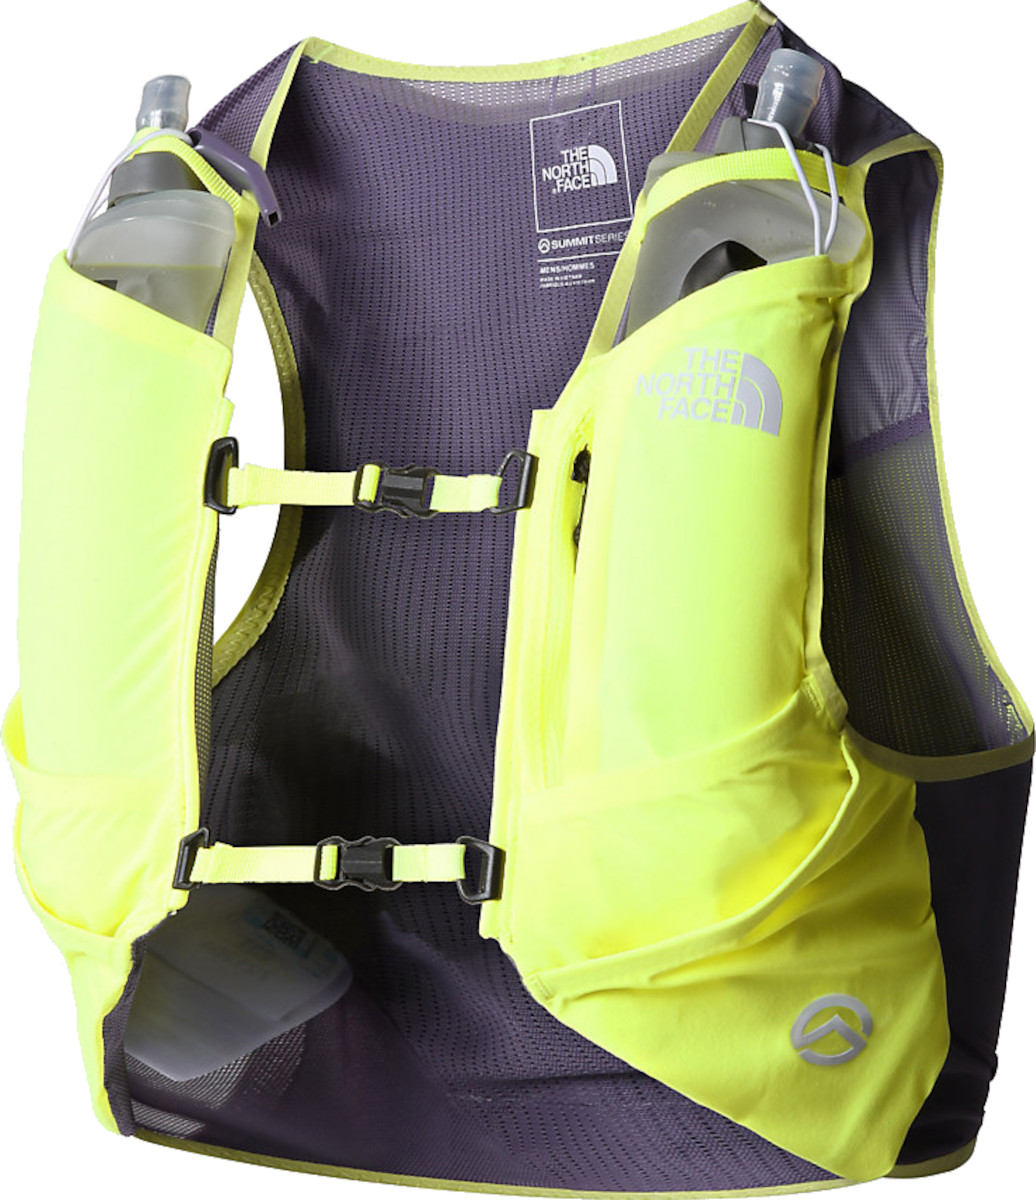 Rucsac The North Face SUMMIT RUN RACE DAY VEST 8